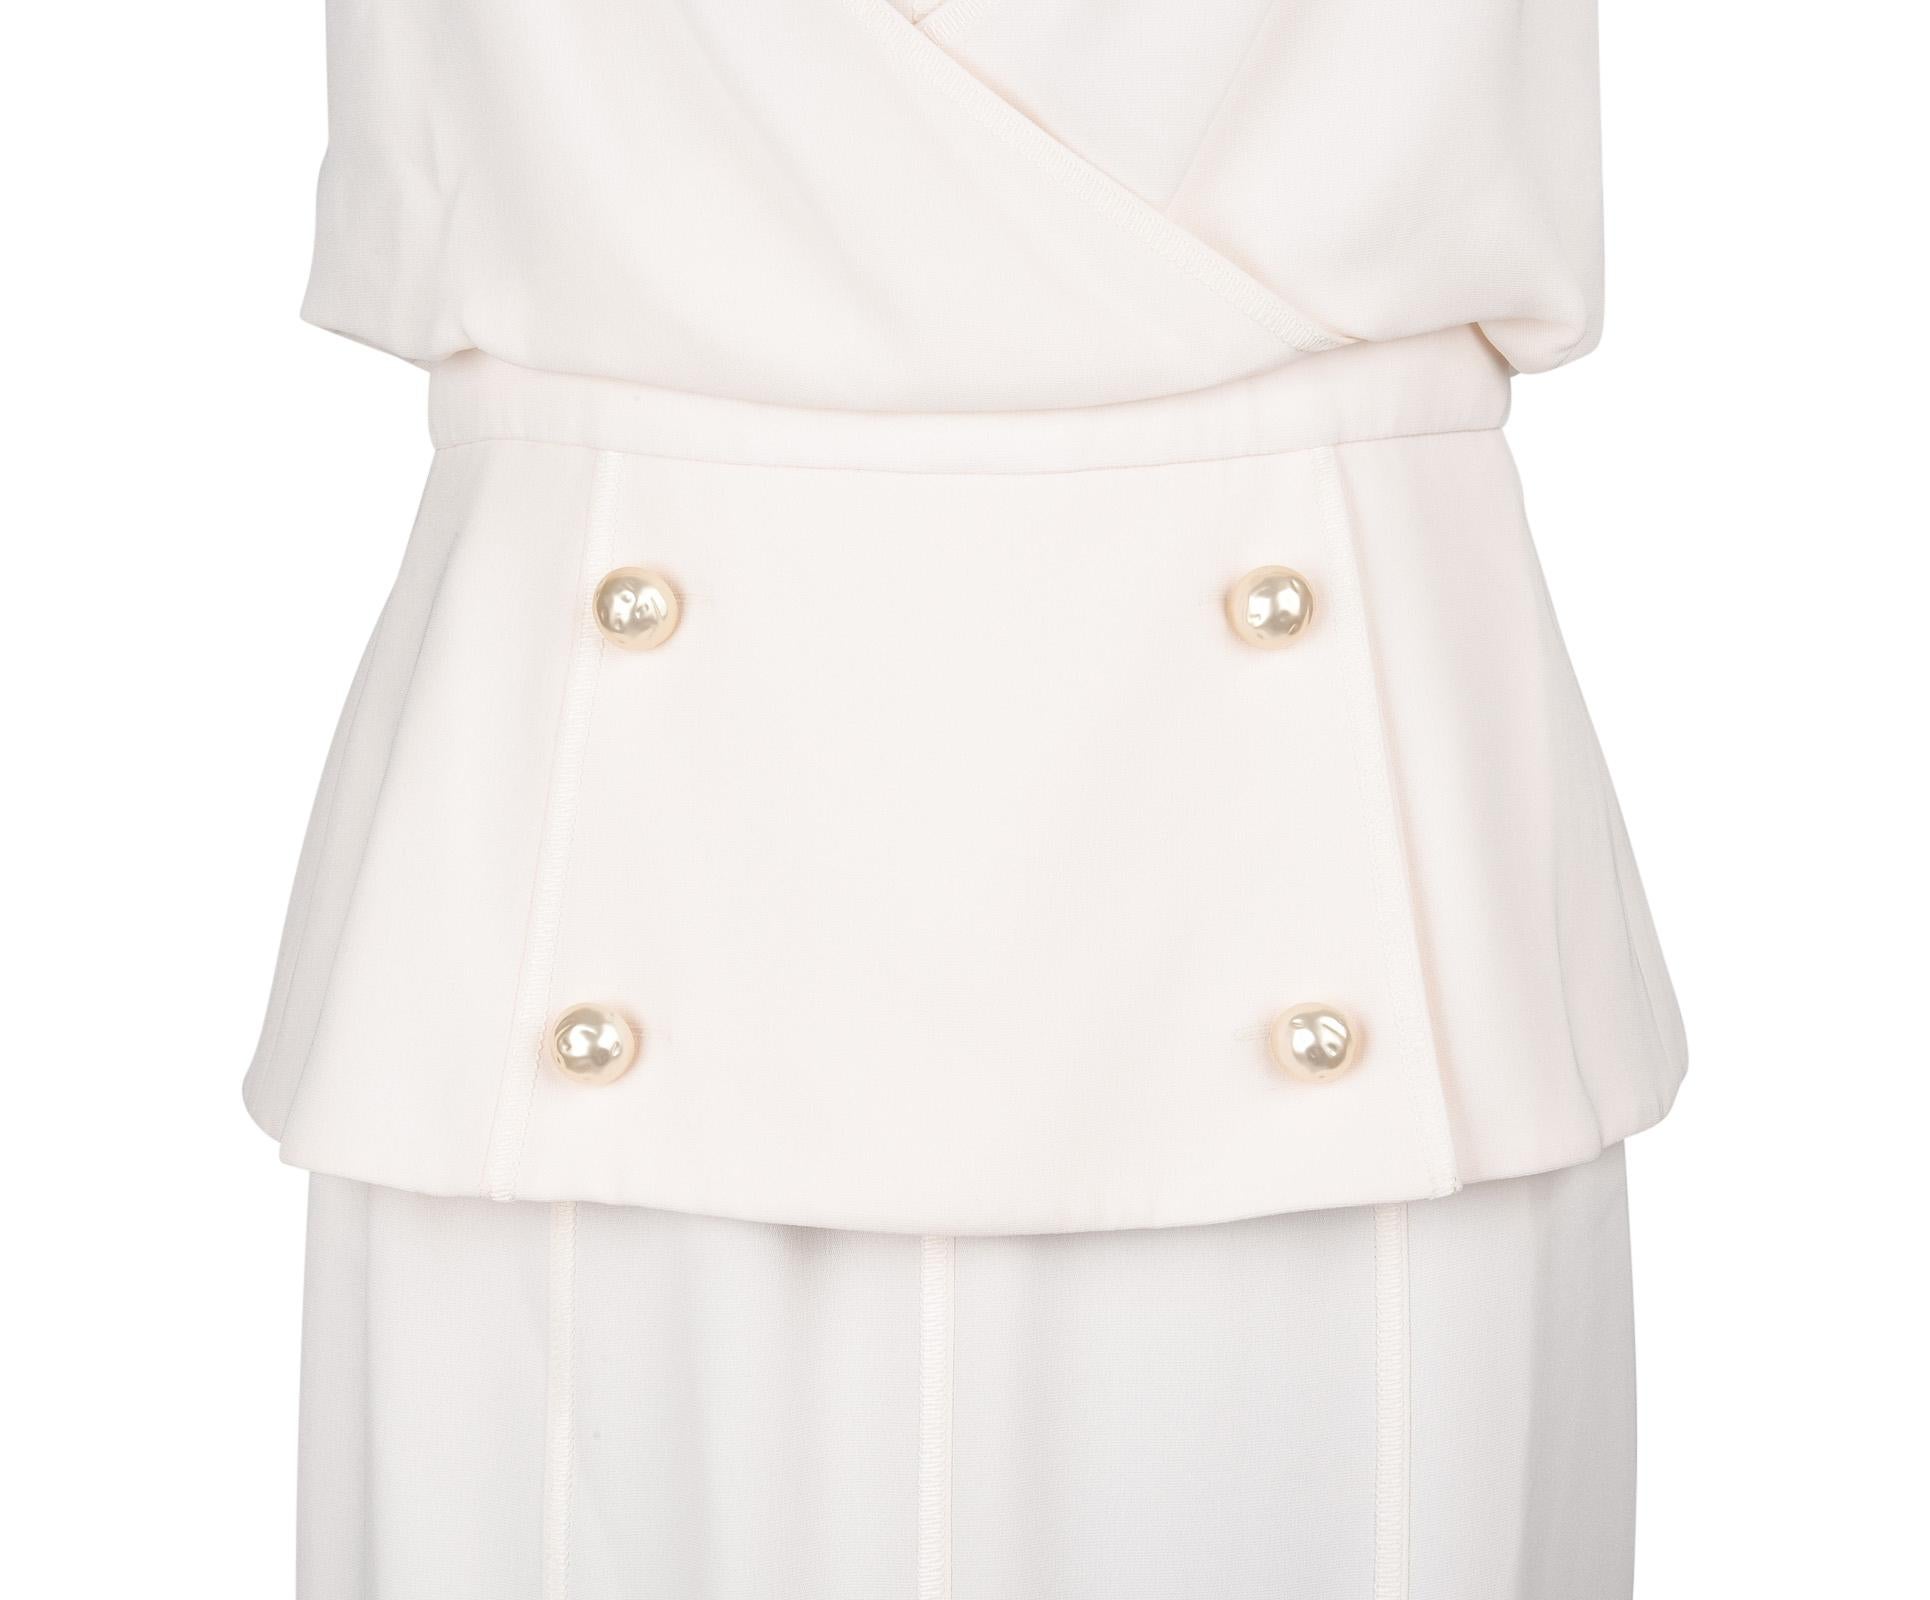 Guaranteed authentic Chanel 14C runway winter white floor length open back dress.
Squared neckline with soft draping and layering effect in front. 
Peplum waist with 4 large faux pearl buttons.
Rear is an open beautifully draped V with subtle gold